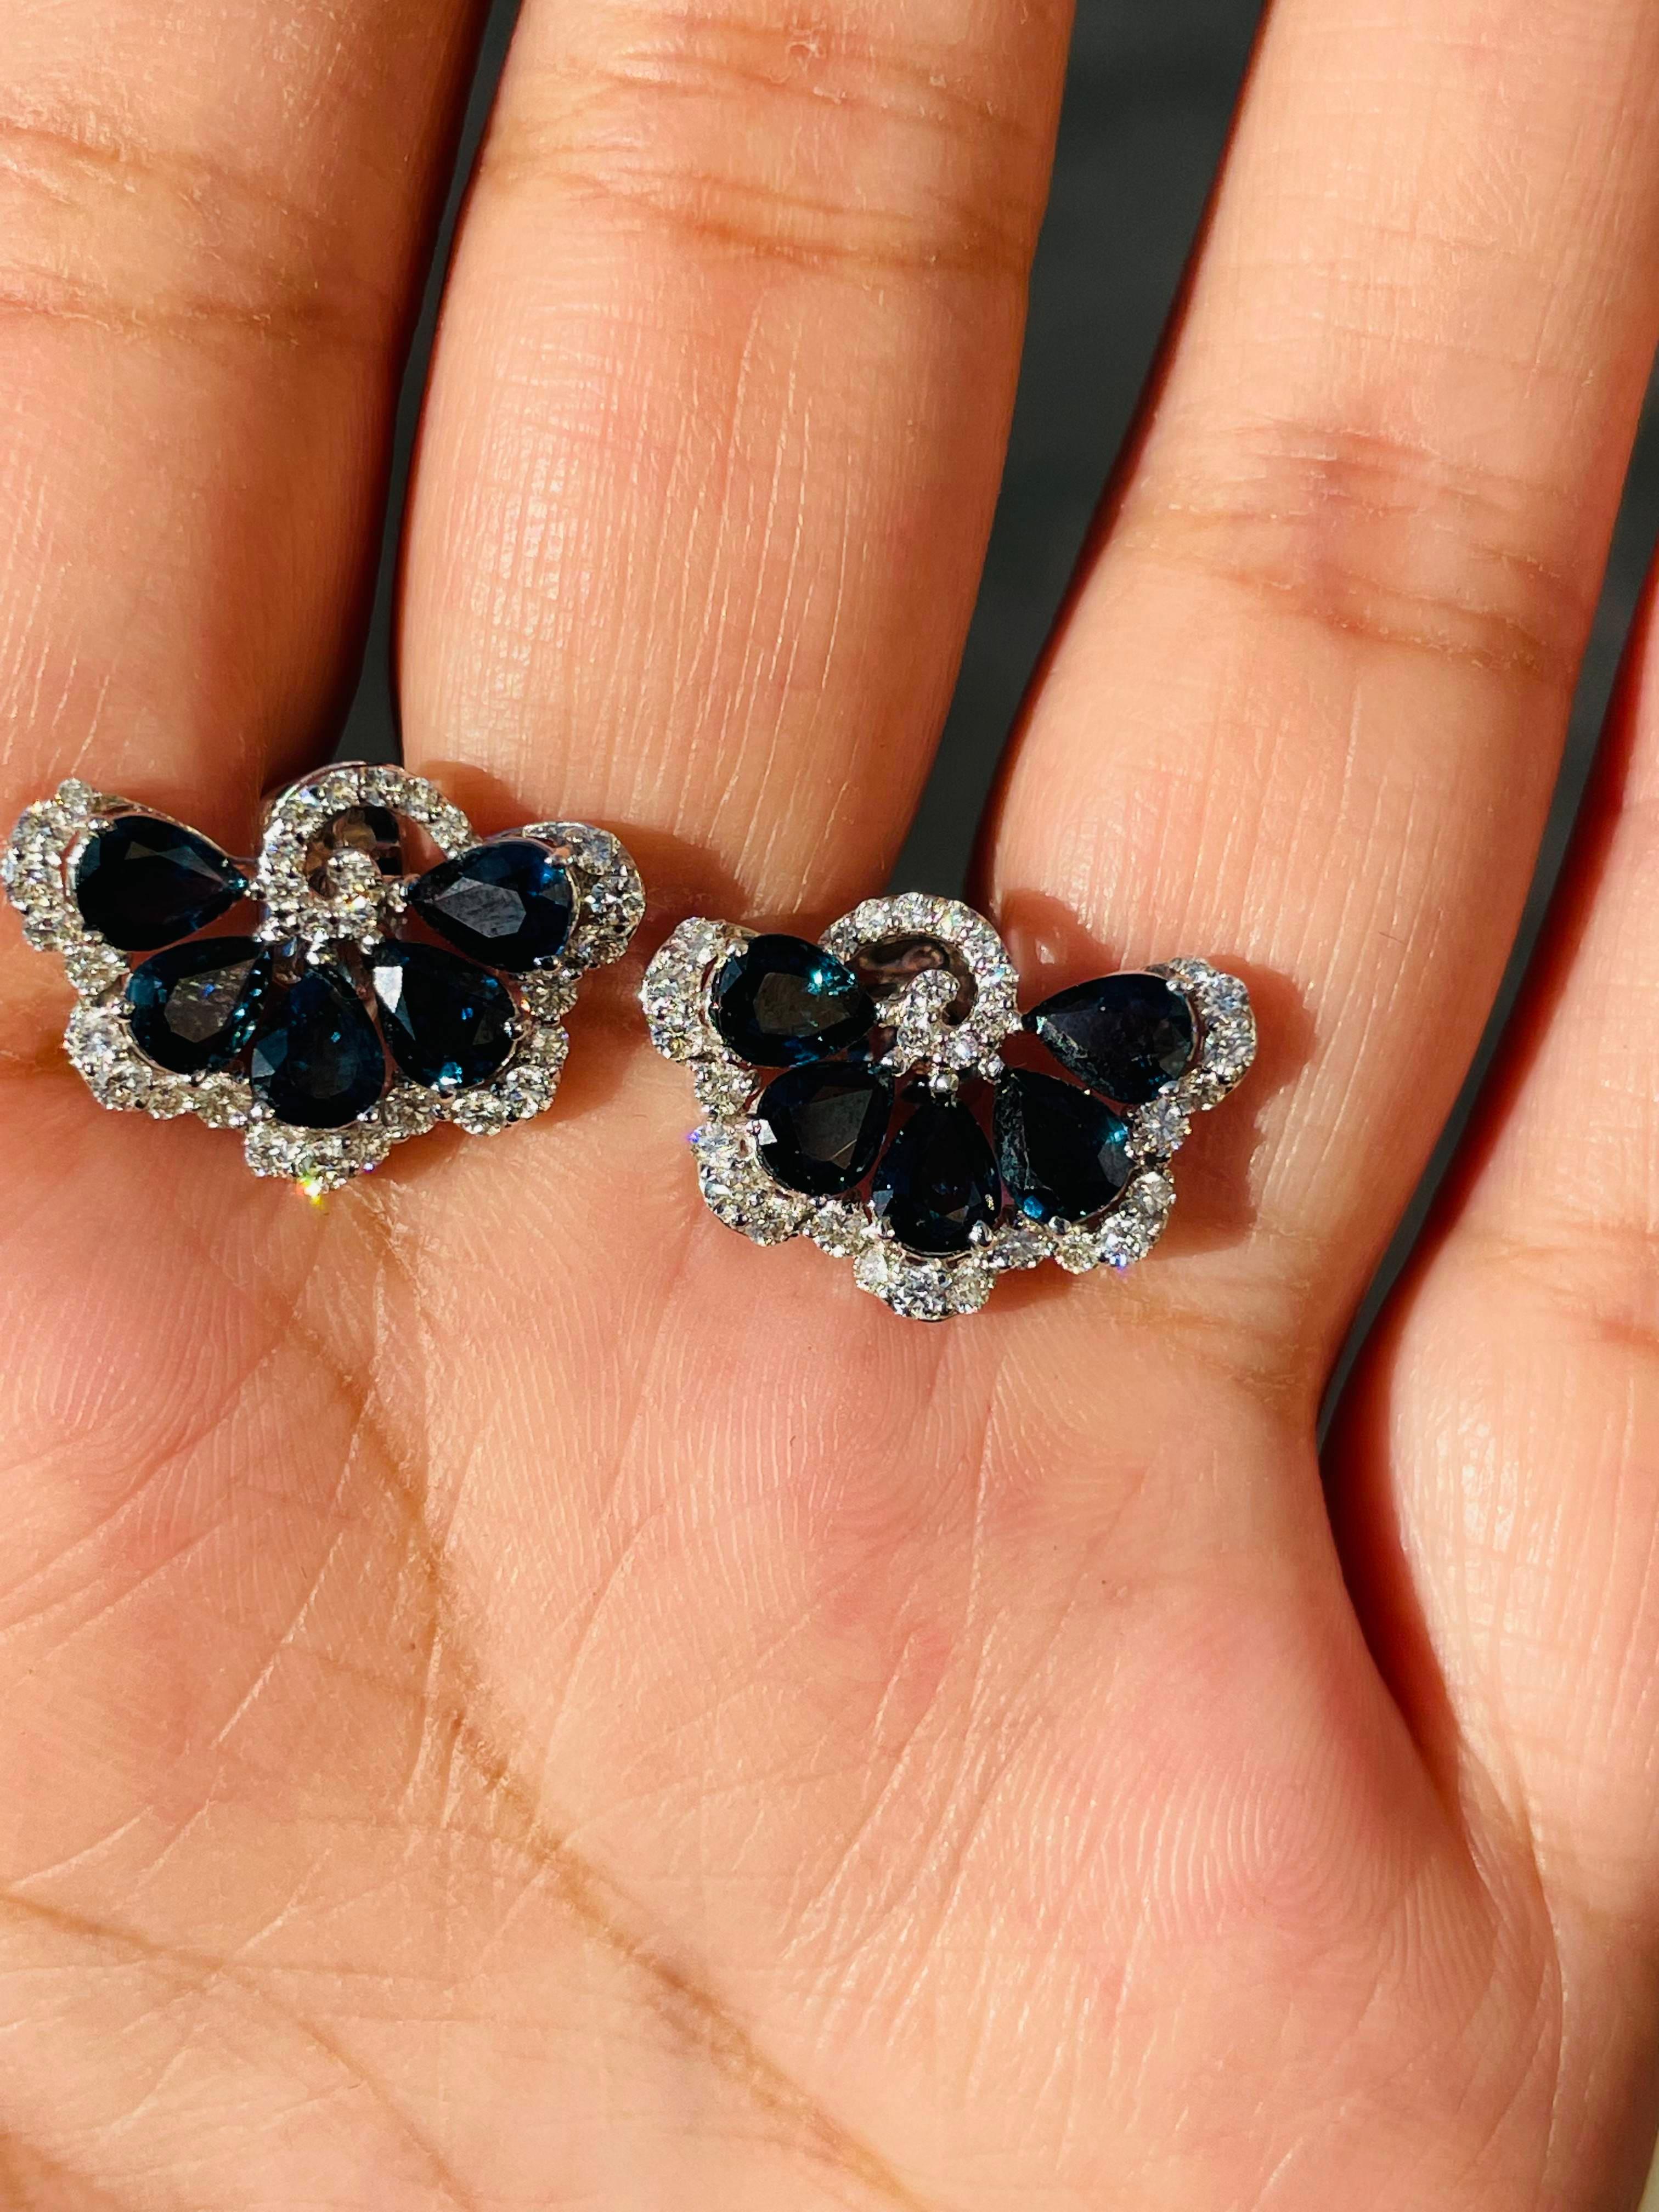 Studs create a subtle beauty while showcasing the colors of the natural precious gemstones and illuminating diamonds making a statement.

Pear cut blue sapphire studs with diamonds in 18K gold. Embrace your look with these stunning pair of earrings